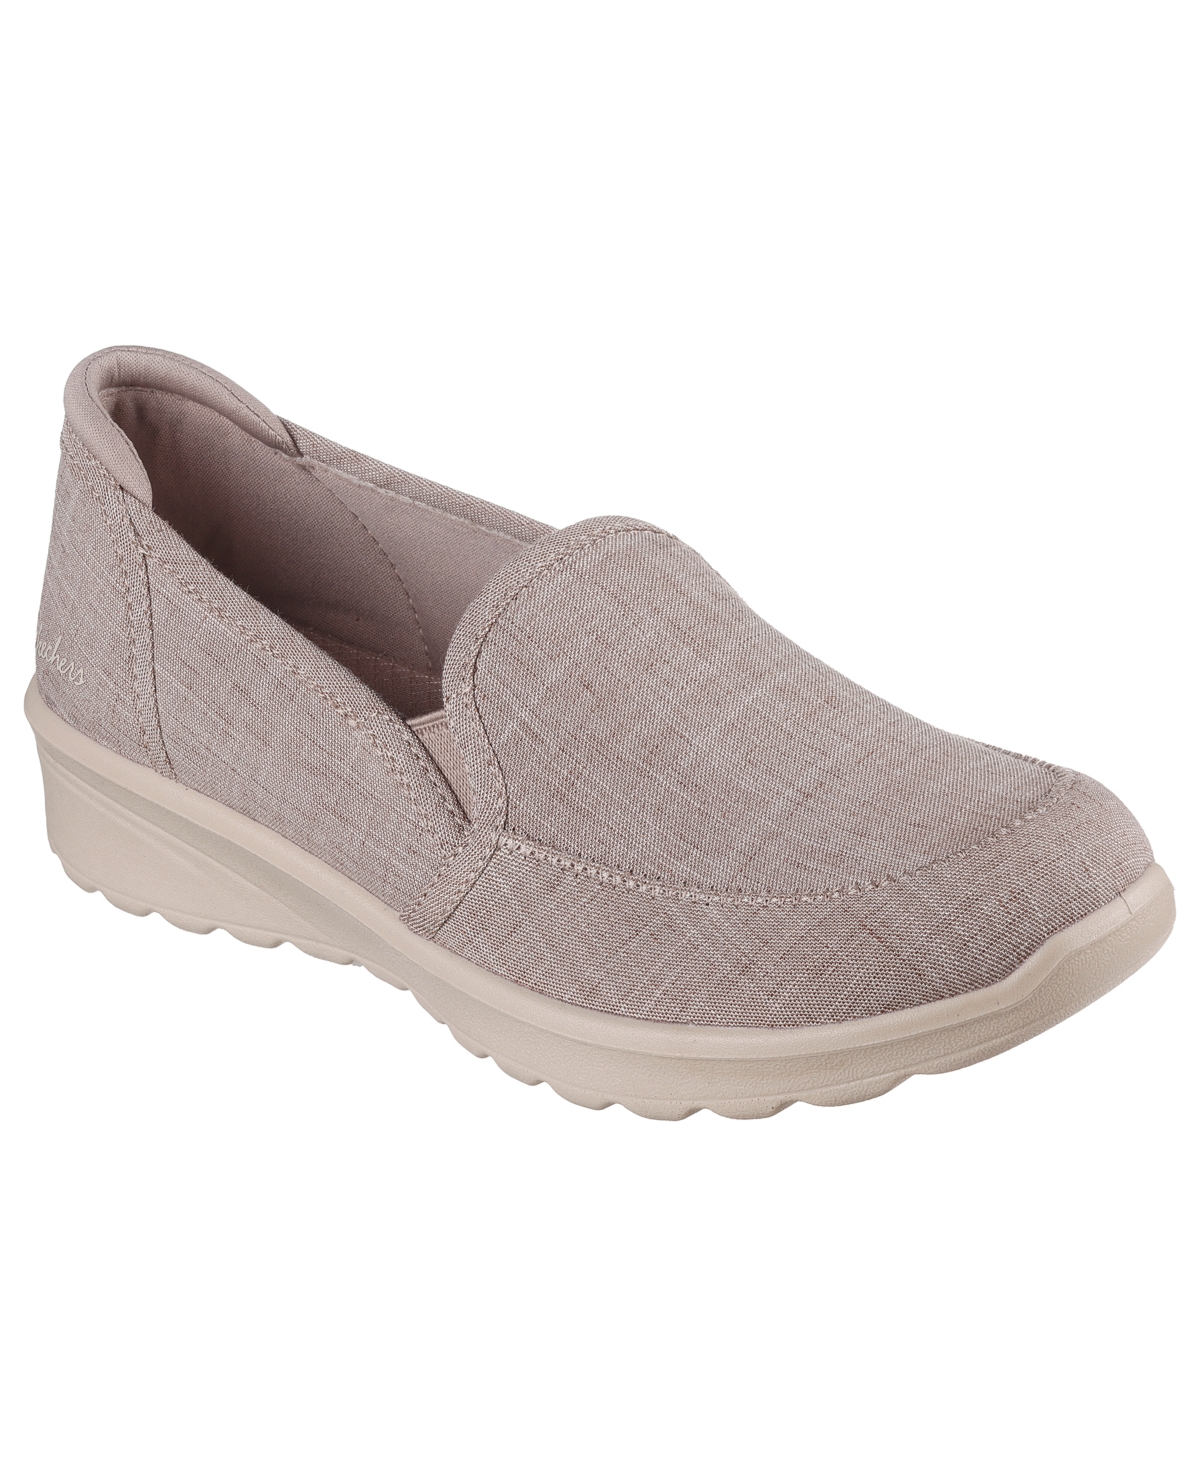 Skechers Women's Lovely Vibe Slip-on Casual Sneakers From Finish Line In Tpe-taupe